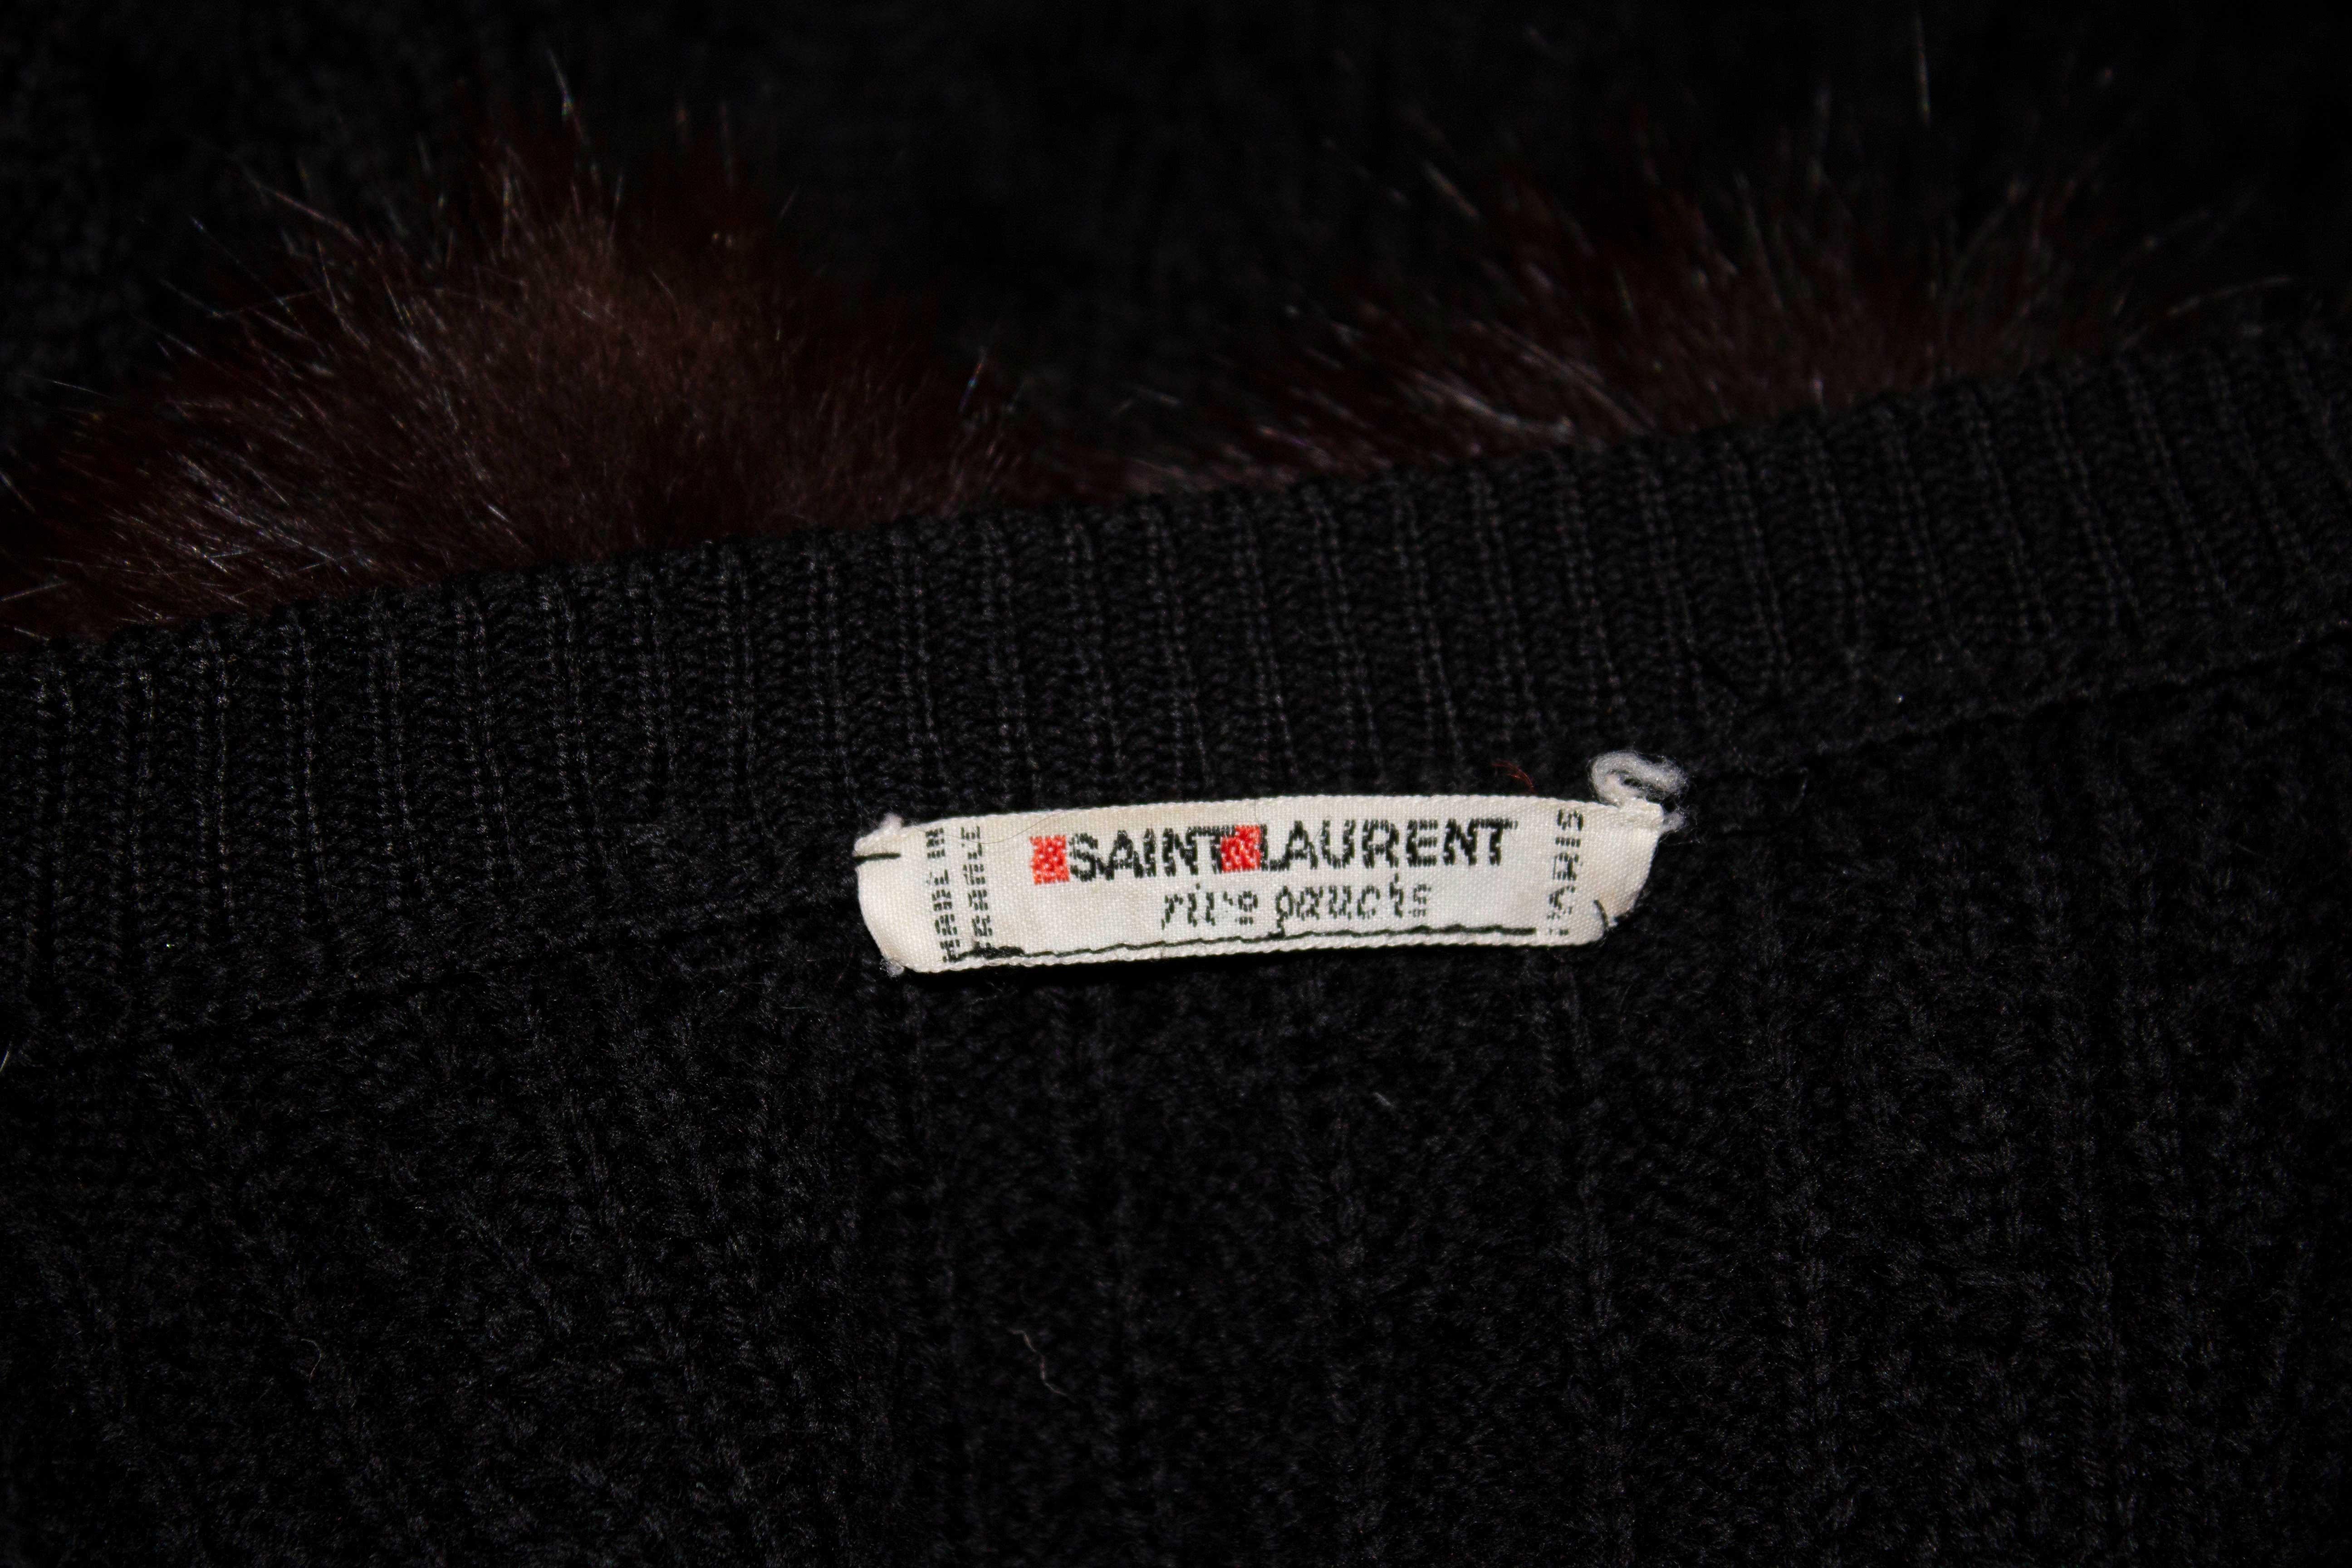 A wonderful warmer for Fall. This black wool knitted cardigan by Yves Satin Laurent Rive Gauche has a pocket either side at hip level, a button front opening and small knitted shoulder pads. It has mink ball decoration around the neckline. Size 44 .